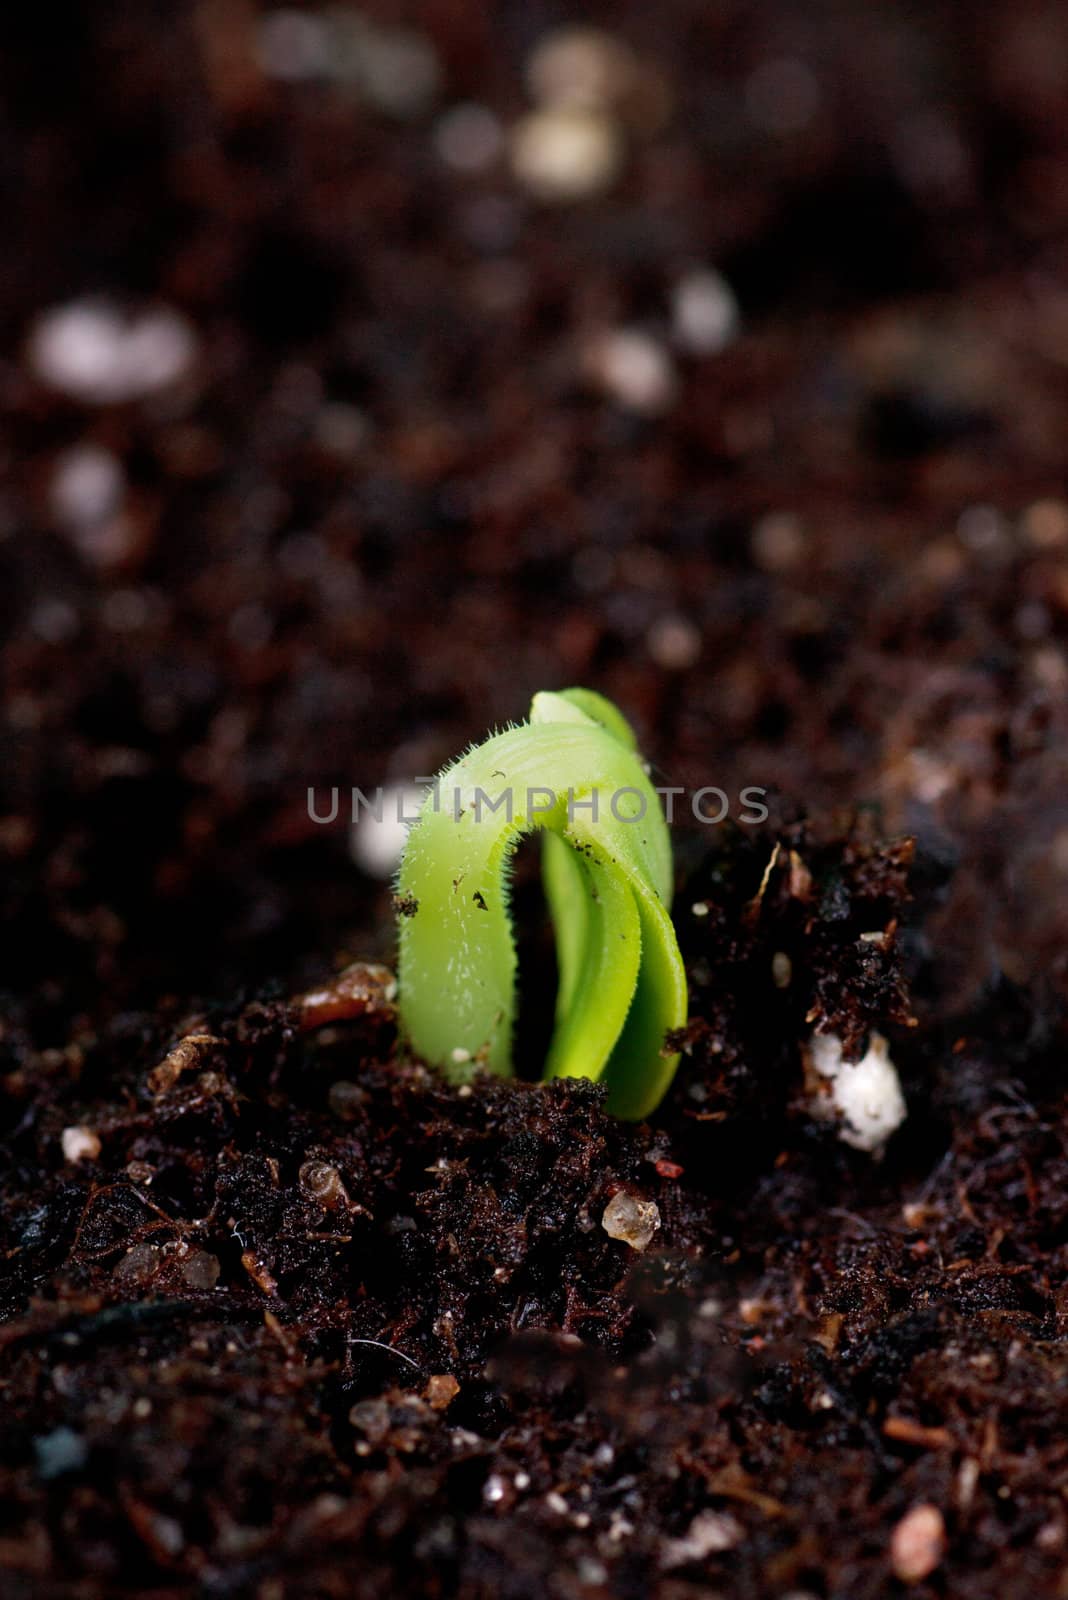 Smal green plant begins to shoot